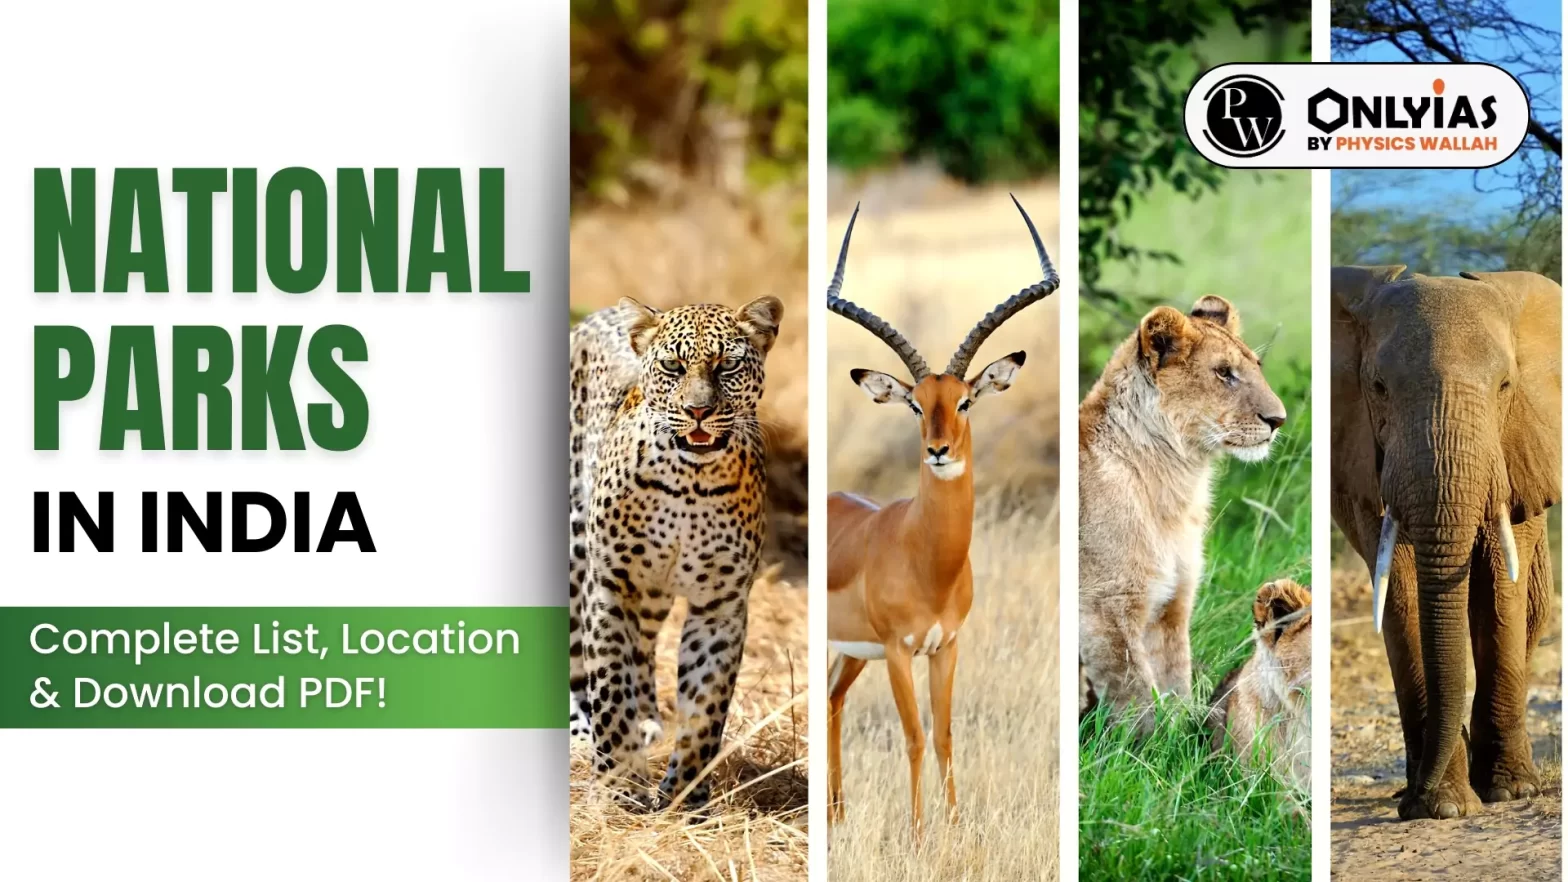 National Parks in India: Complete List, Location & Download PDF!